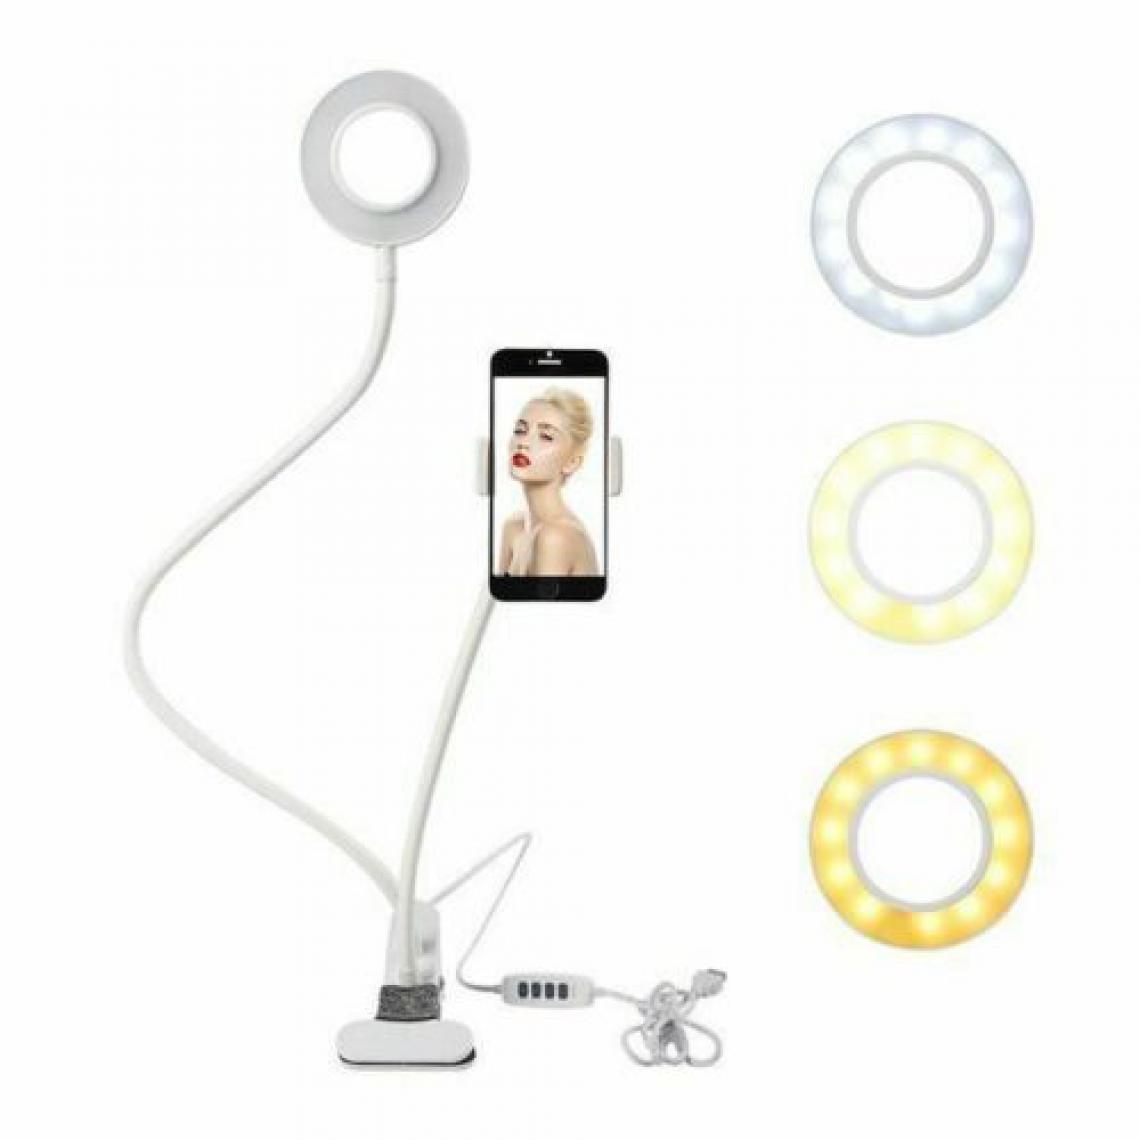 Ozzzo - Stand support bureau selfie led ozzzo blanc pour SAMSUNG N9005 Galaxy Note 3 - Station d'accueil smartphone